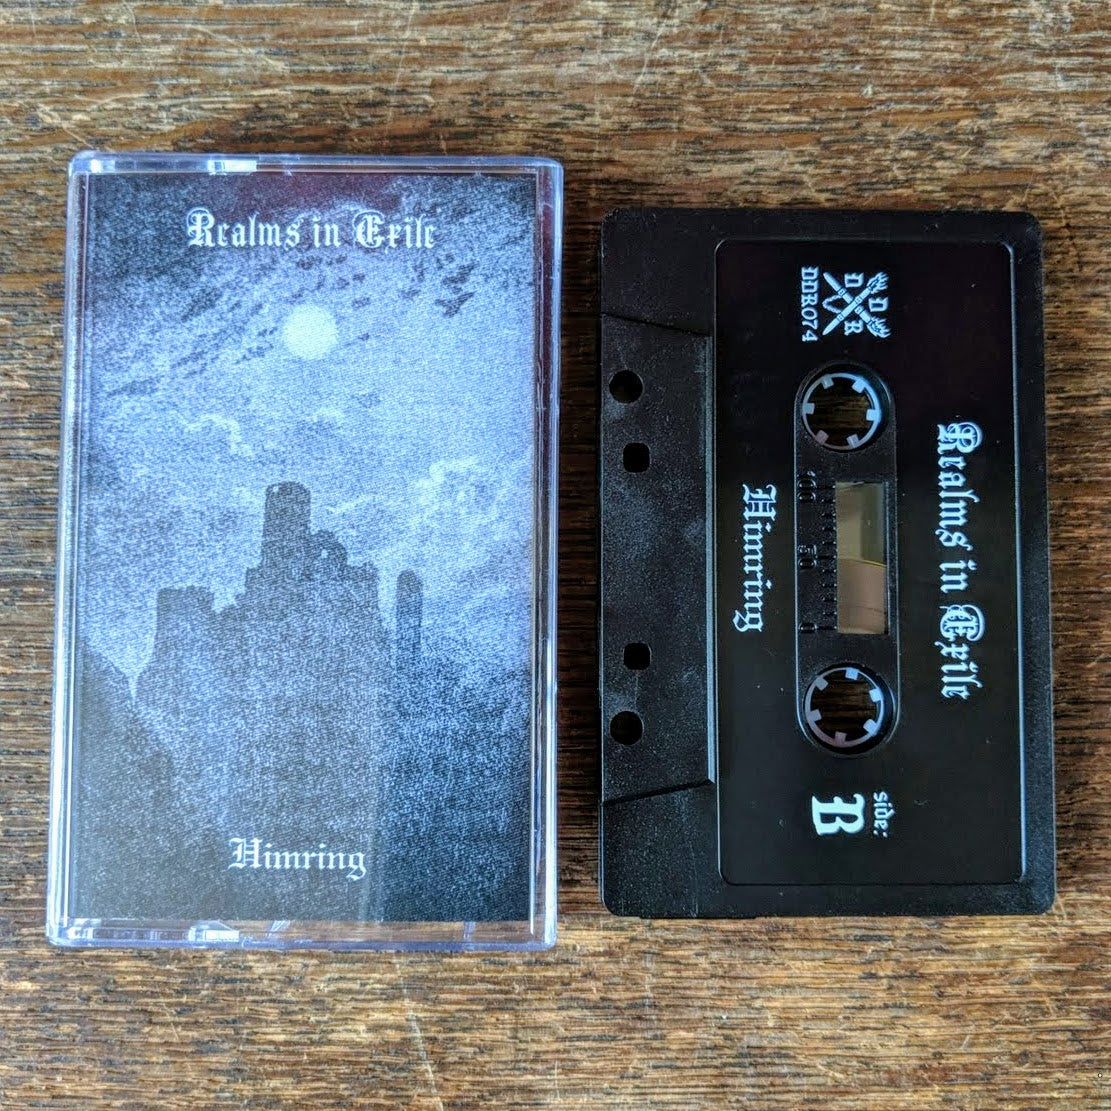 [SOLD OUT] REALMS IN EXILE "Himring" Cassette Tape